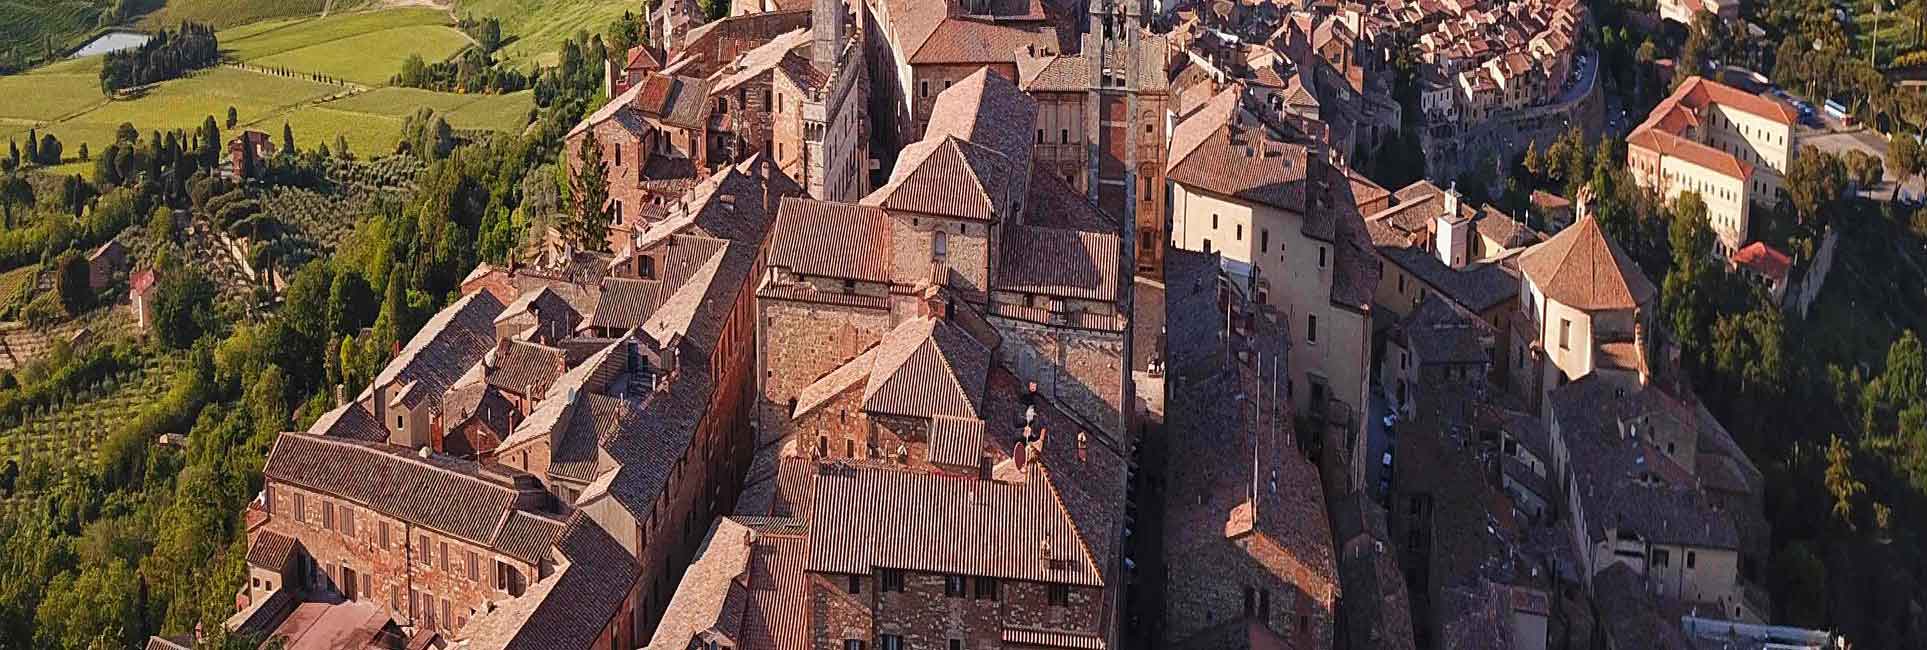 another angle of montepulciano aerial view